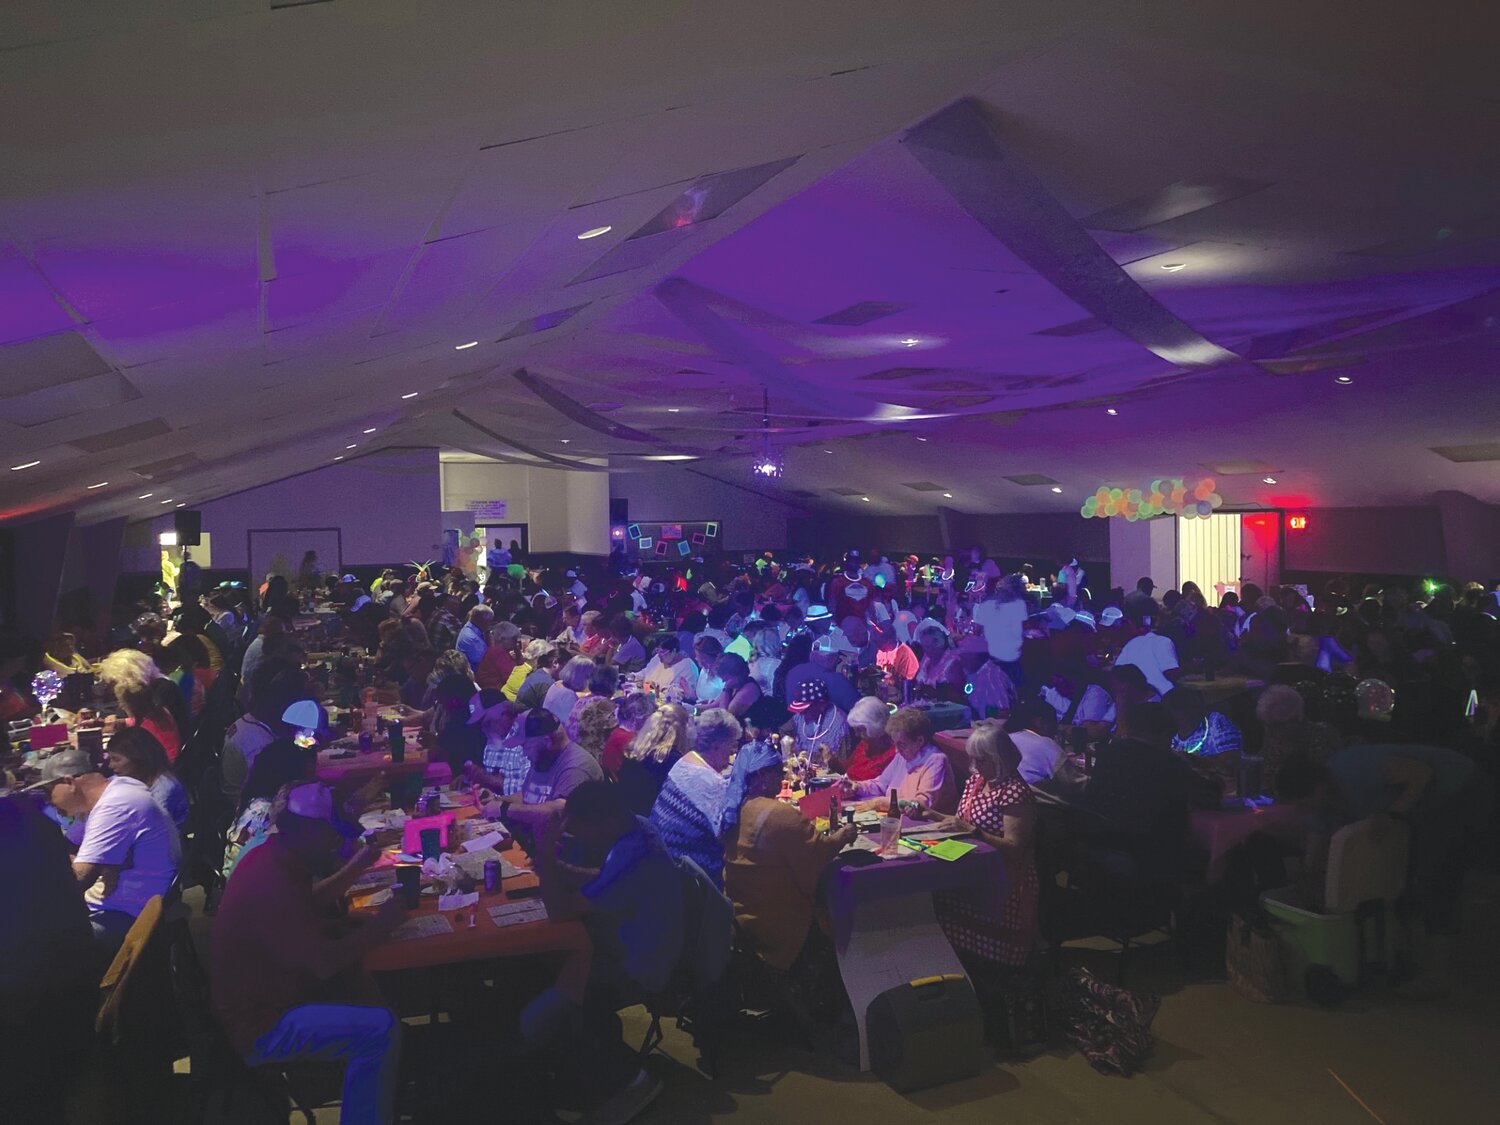 Participants enjoy last year’s Blacklight Bingo and Taco Bar at the Montgomery County Fairgrounds Merchants Building. The event returns for its second year on Feb. 9-10.